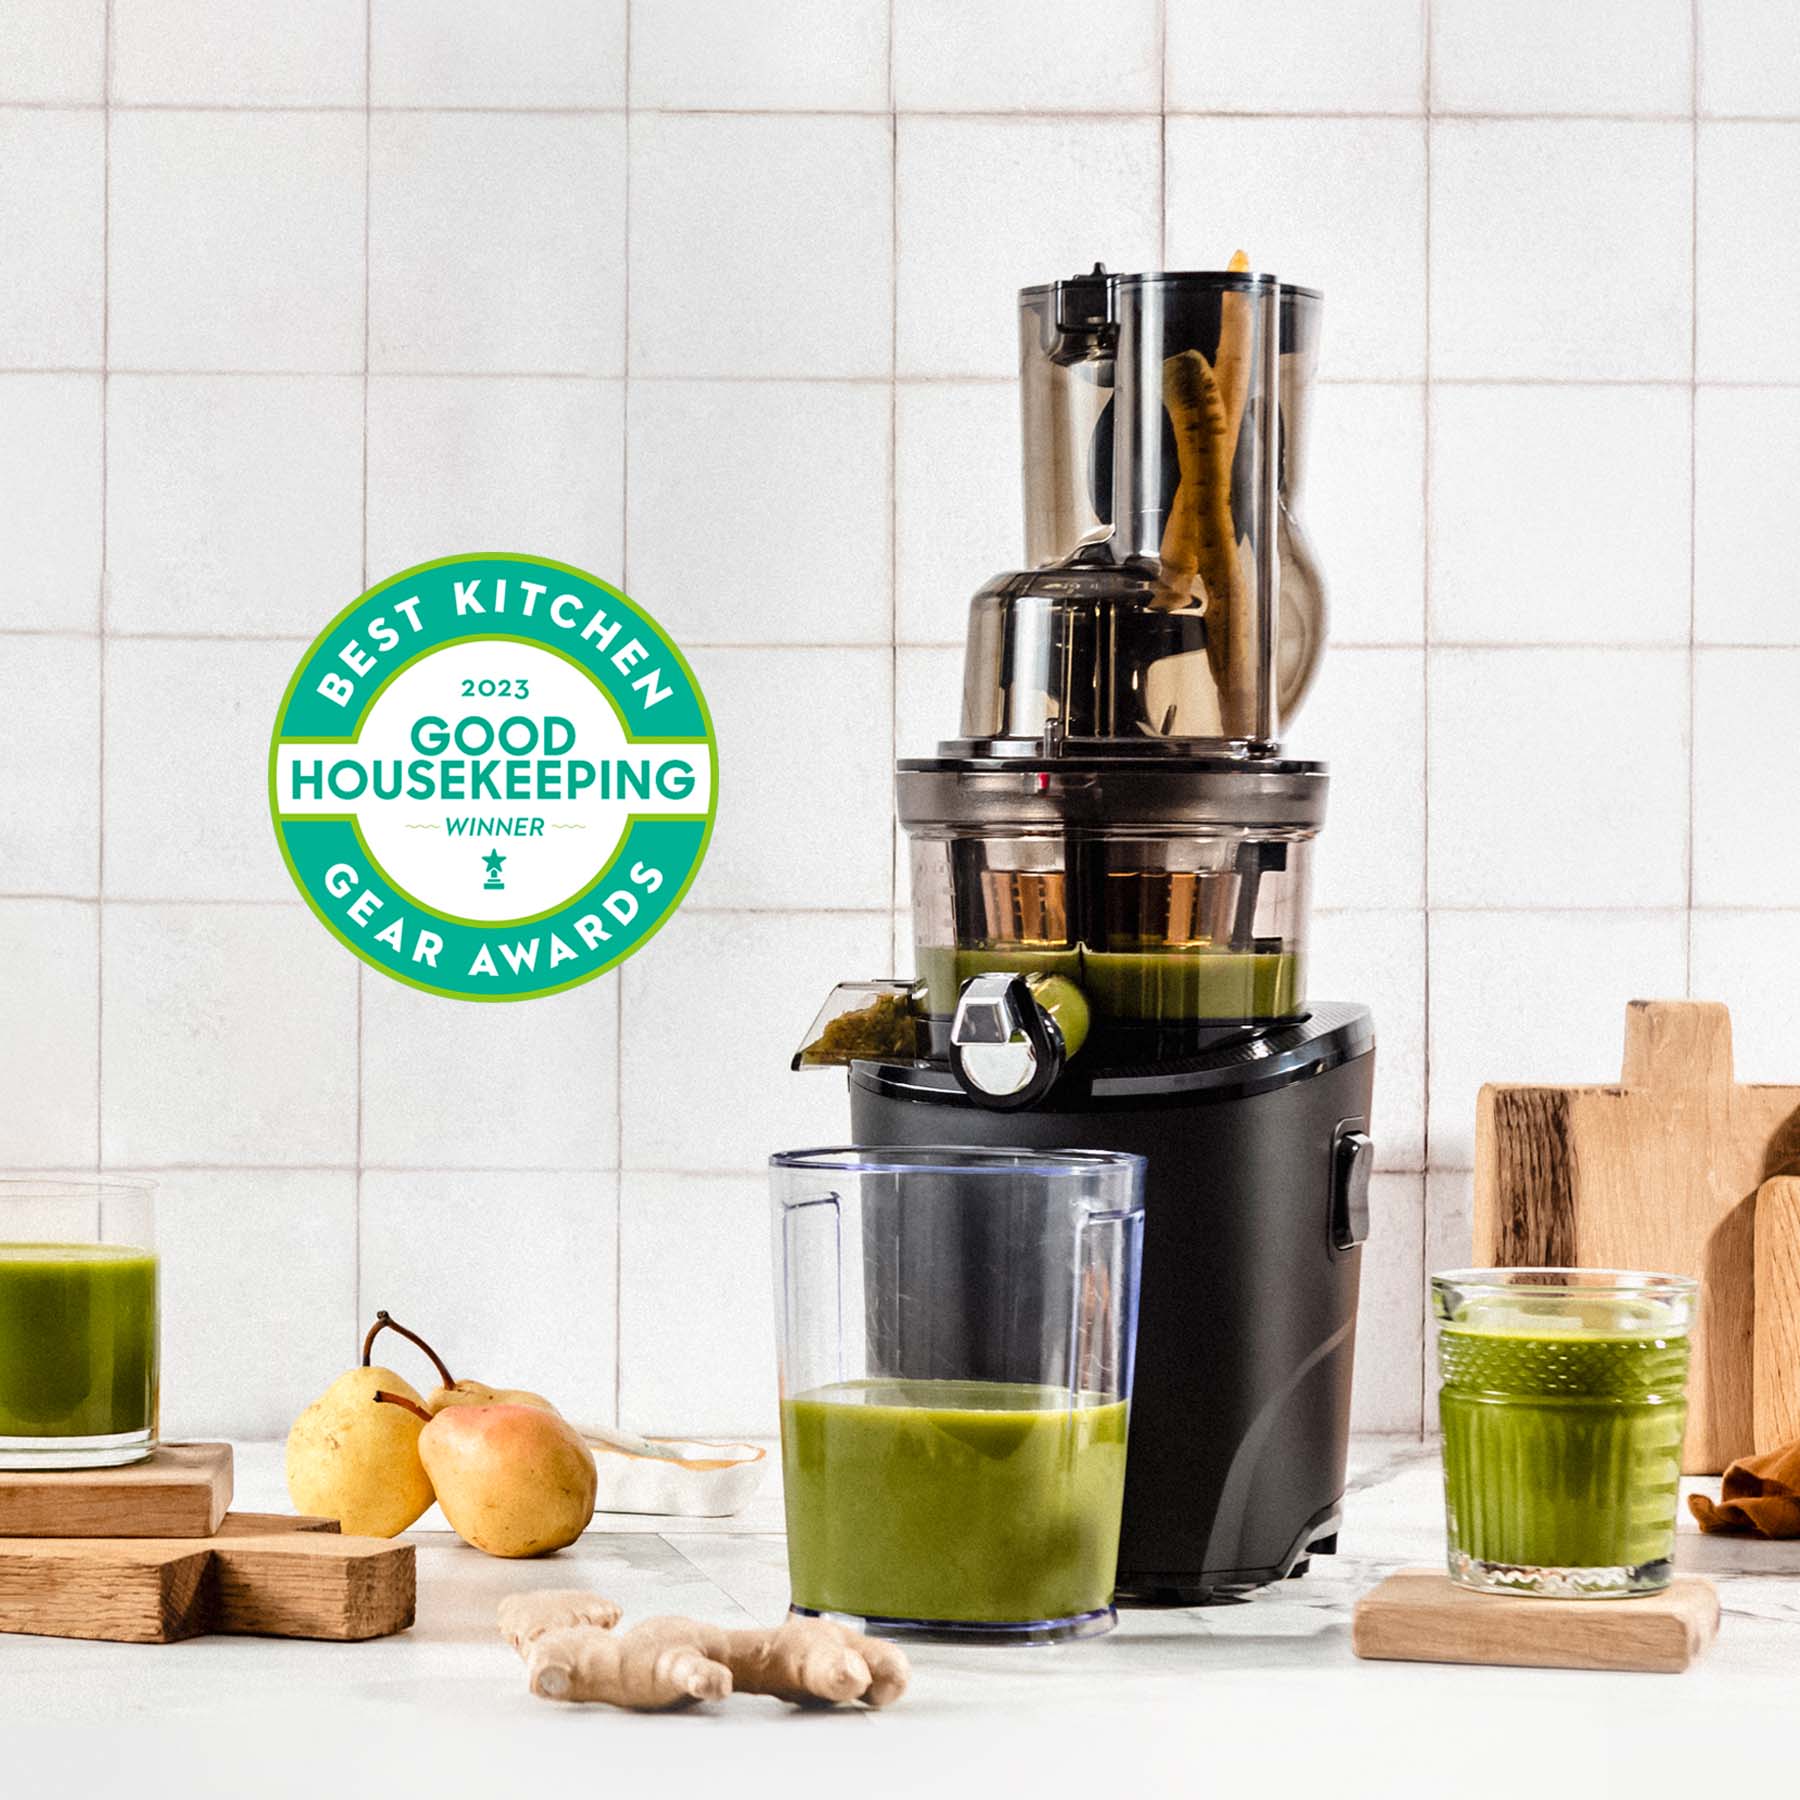 Kuvings Whole Juicer REVO830 Review and Demo 